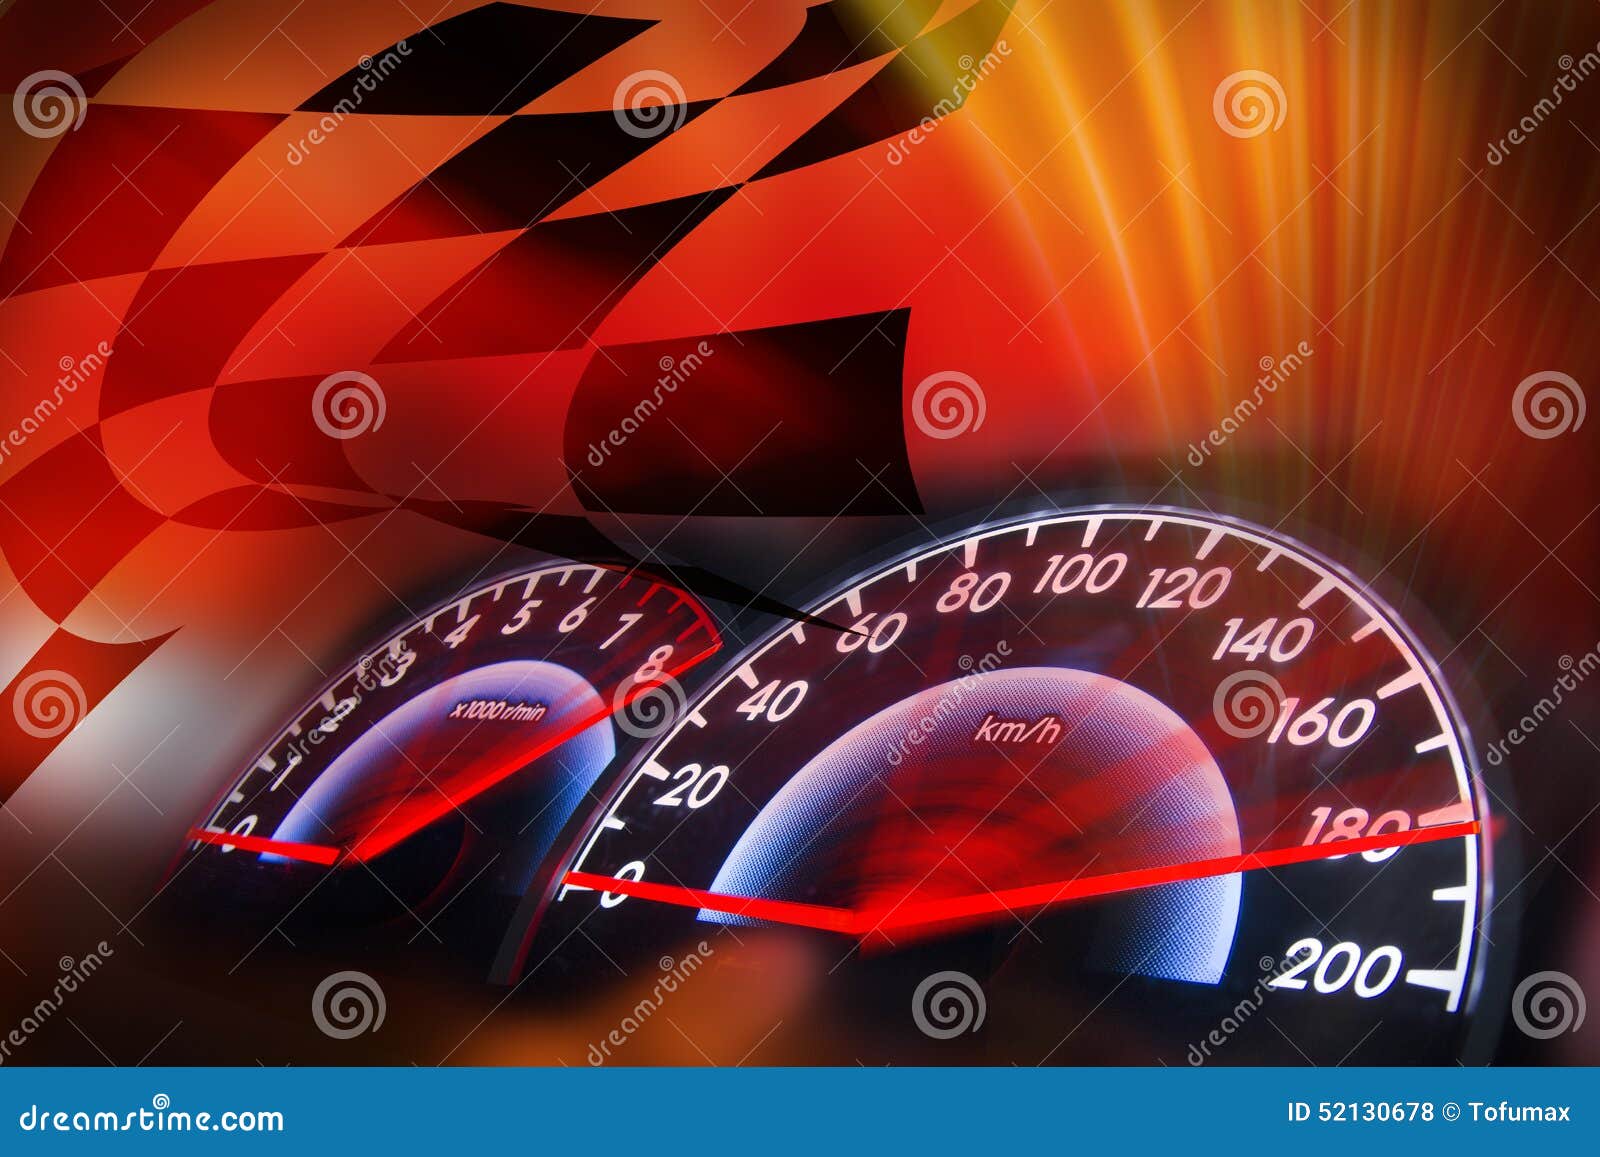 AOFOTO 6x4ft Speedometer Racing Chequered Flag Background Motorcycle Race Photography Backdrop Speed Automobile Formula One Motor Car Auto Motorsport Champion Sport Competition Studio Props Wallpaper